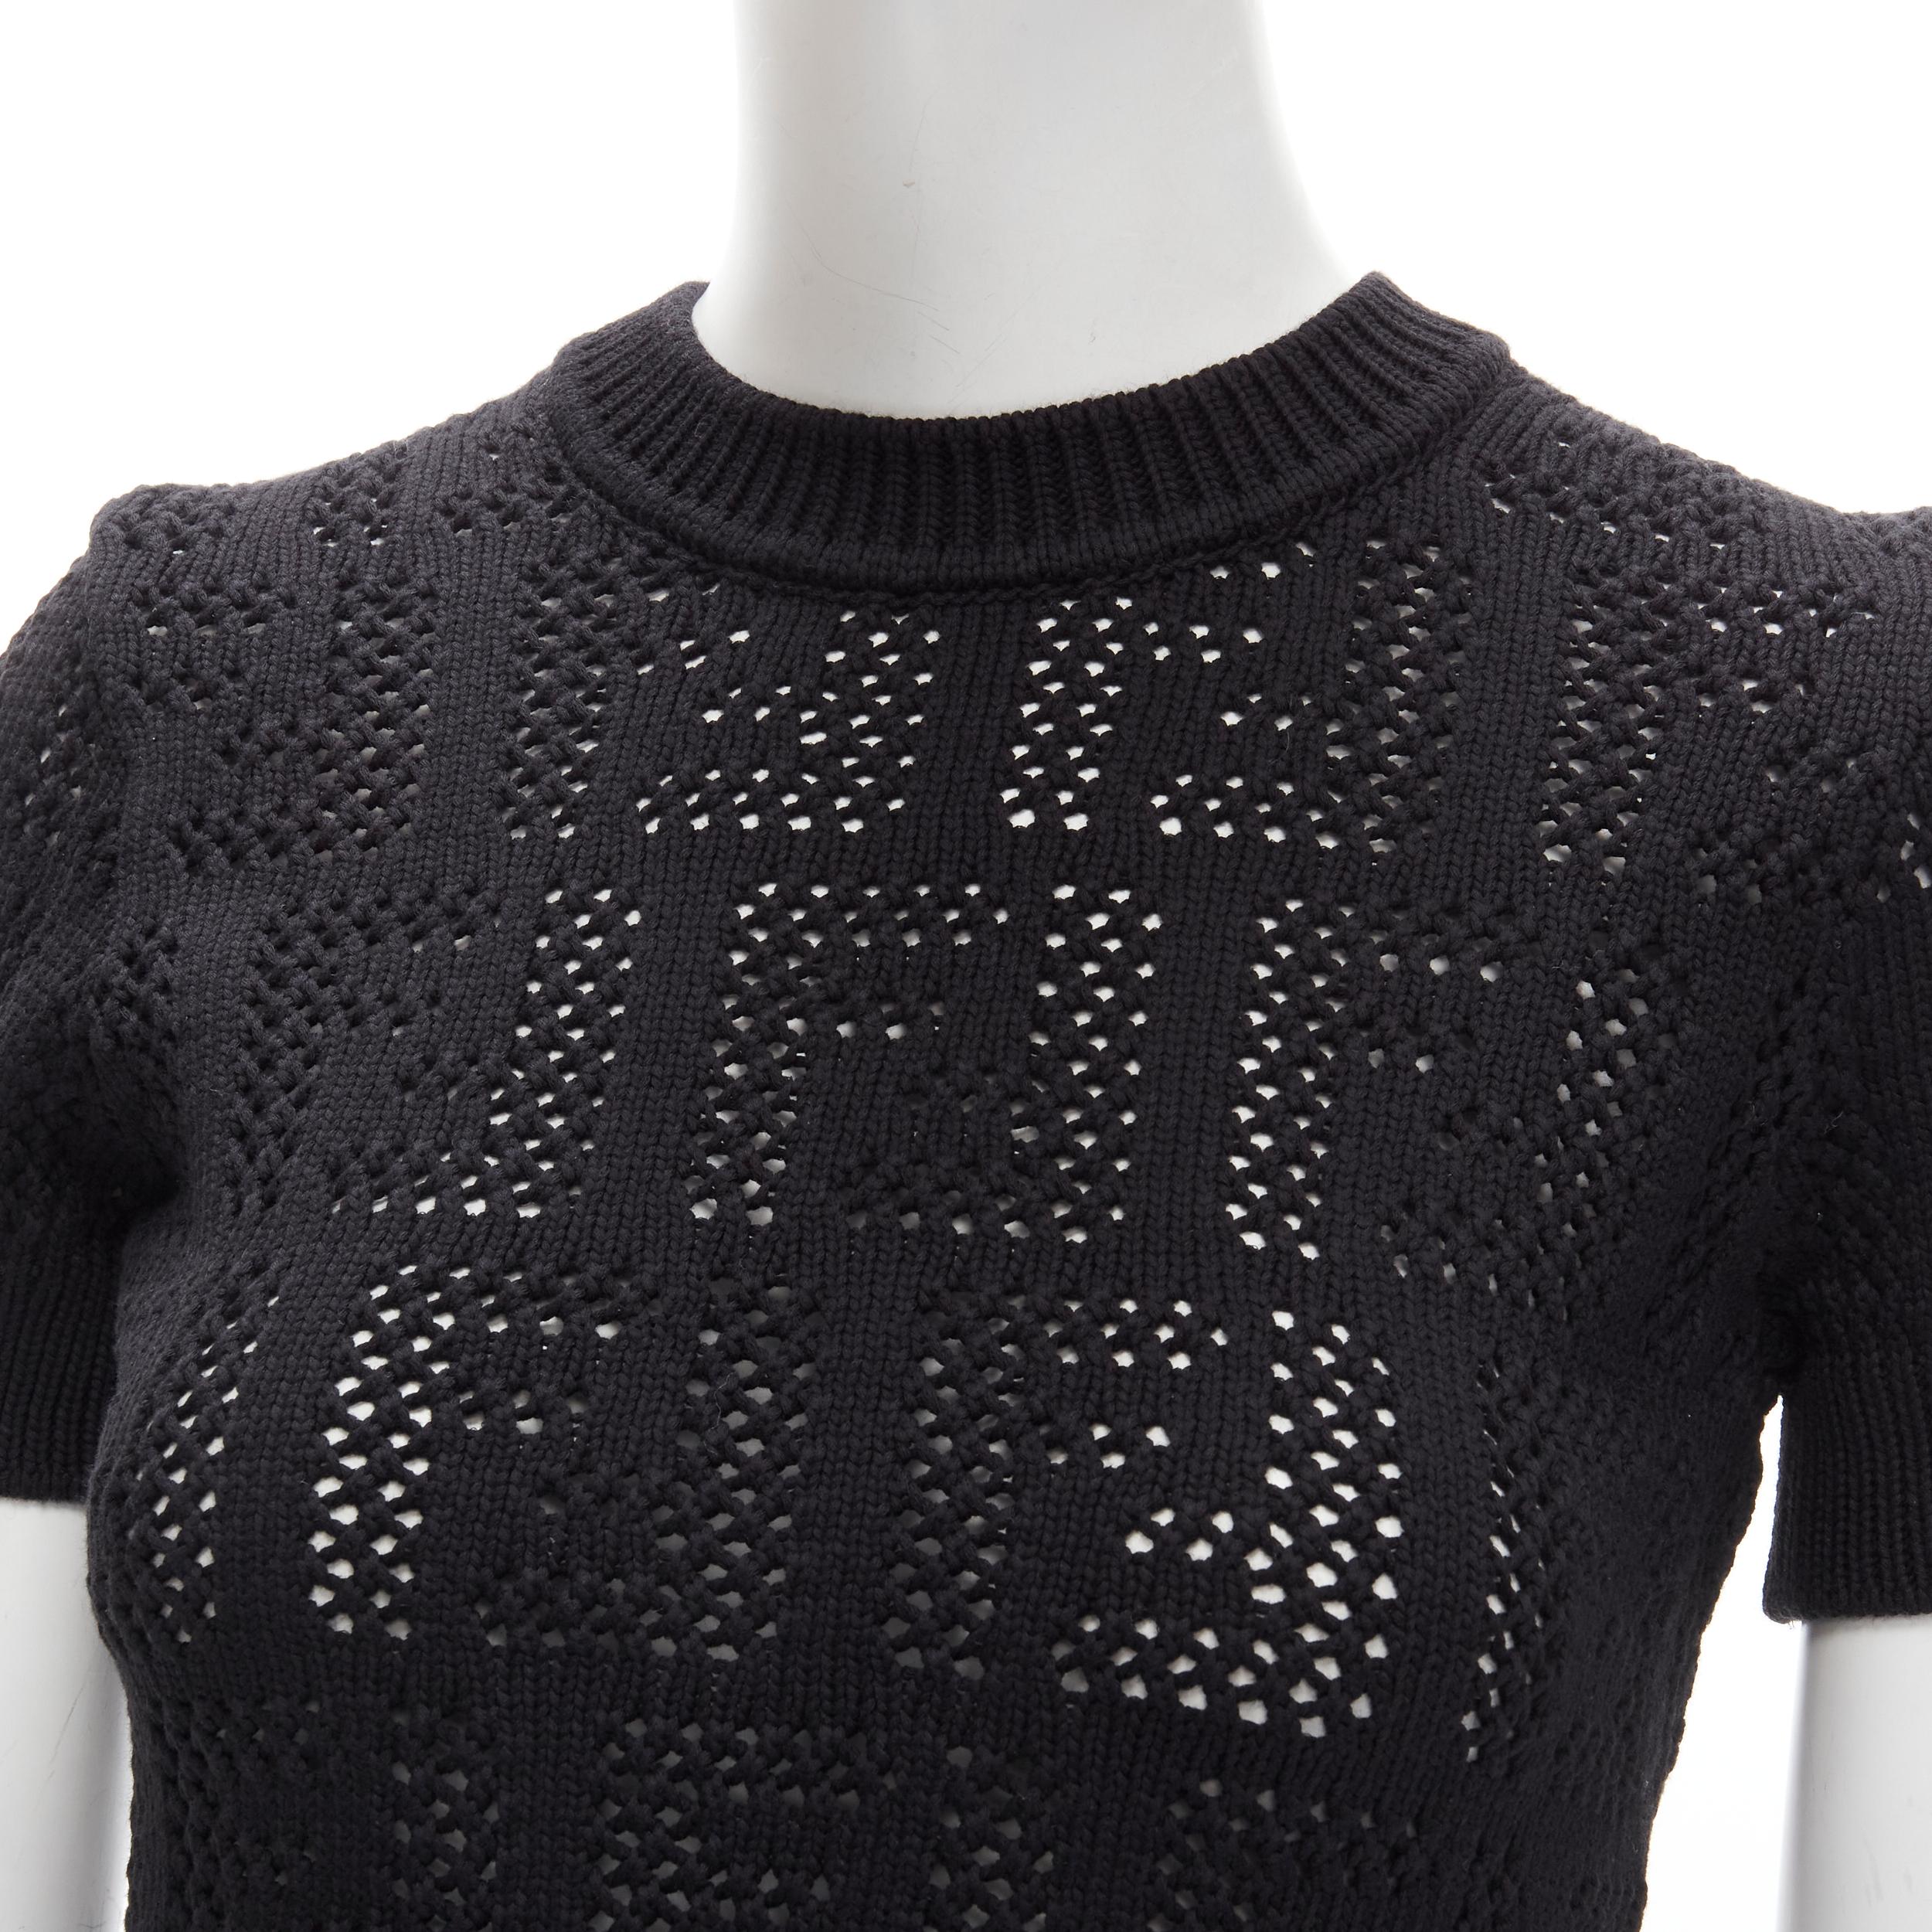 new FENDI FF Zucca black cotton knit crochet sweater top IT36 XS.
Brand: Fendi
Collection: FF Zucca 
Extra Detail: FF Monogram crochet knit. Crew neck short sleeve knitted sweater.
Estimated Retail Price: US $1010

CONDITION:
Condition: New with